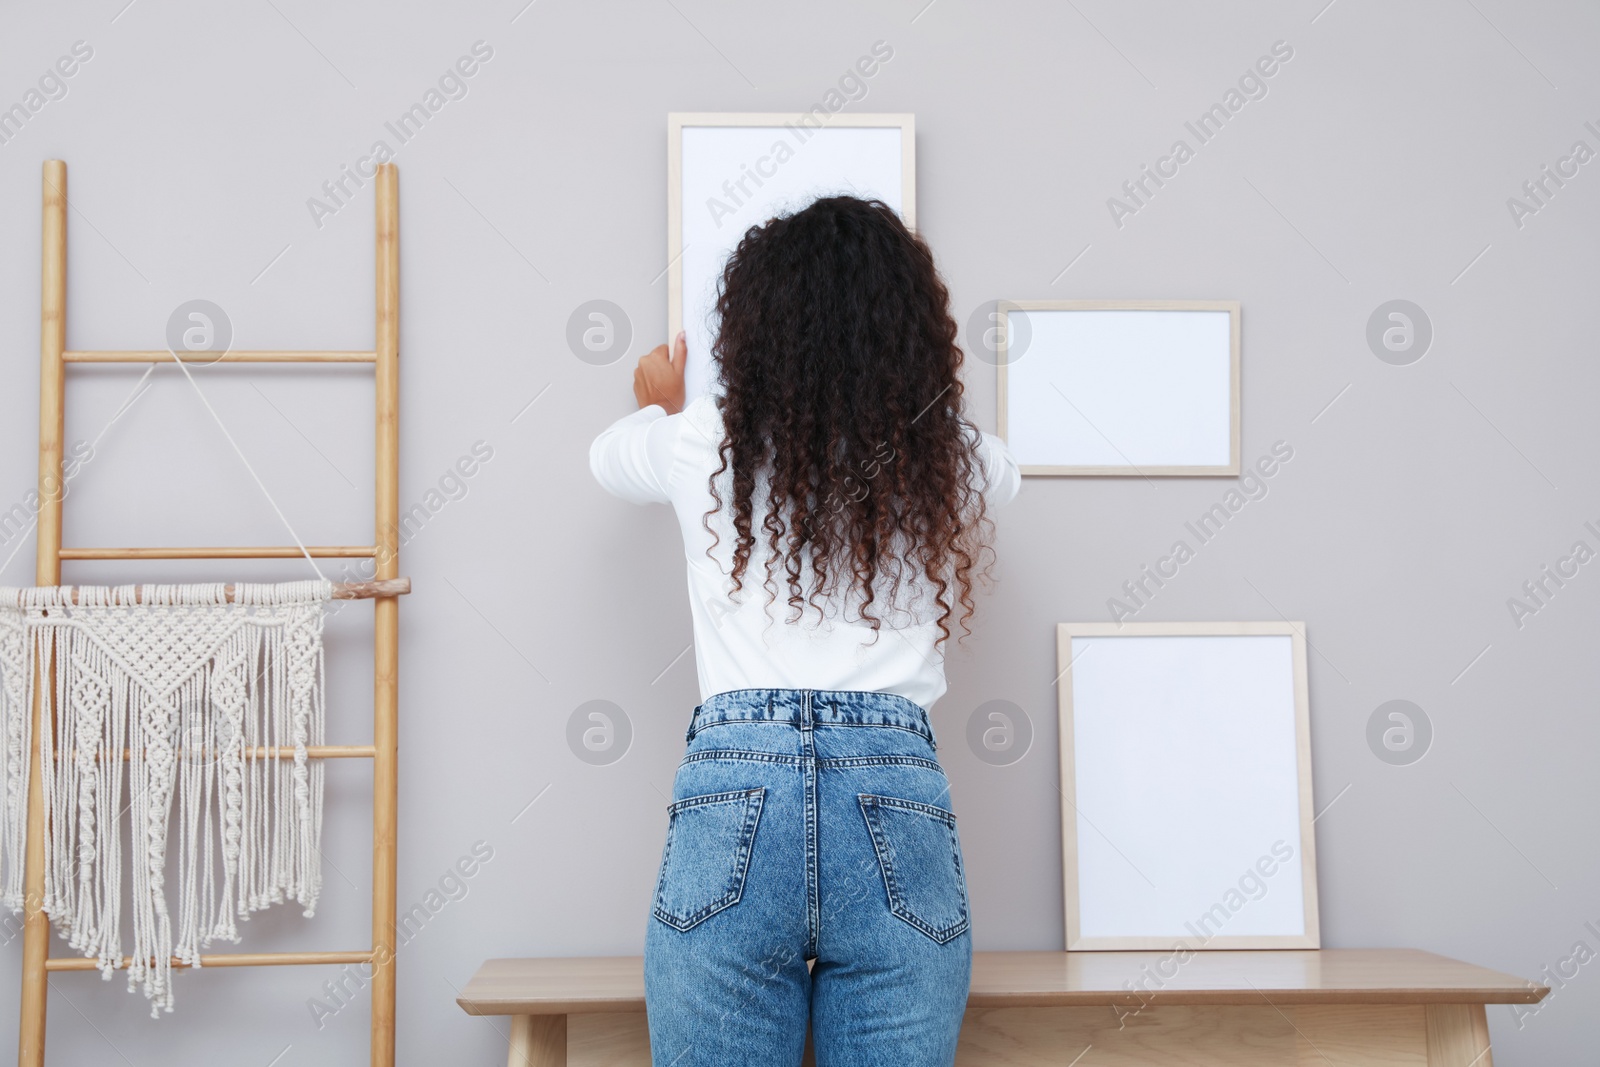 Photo of Woman hanging empty frame on pale rose wall over table in room, back view